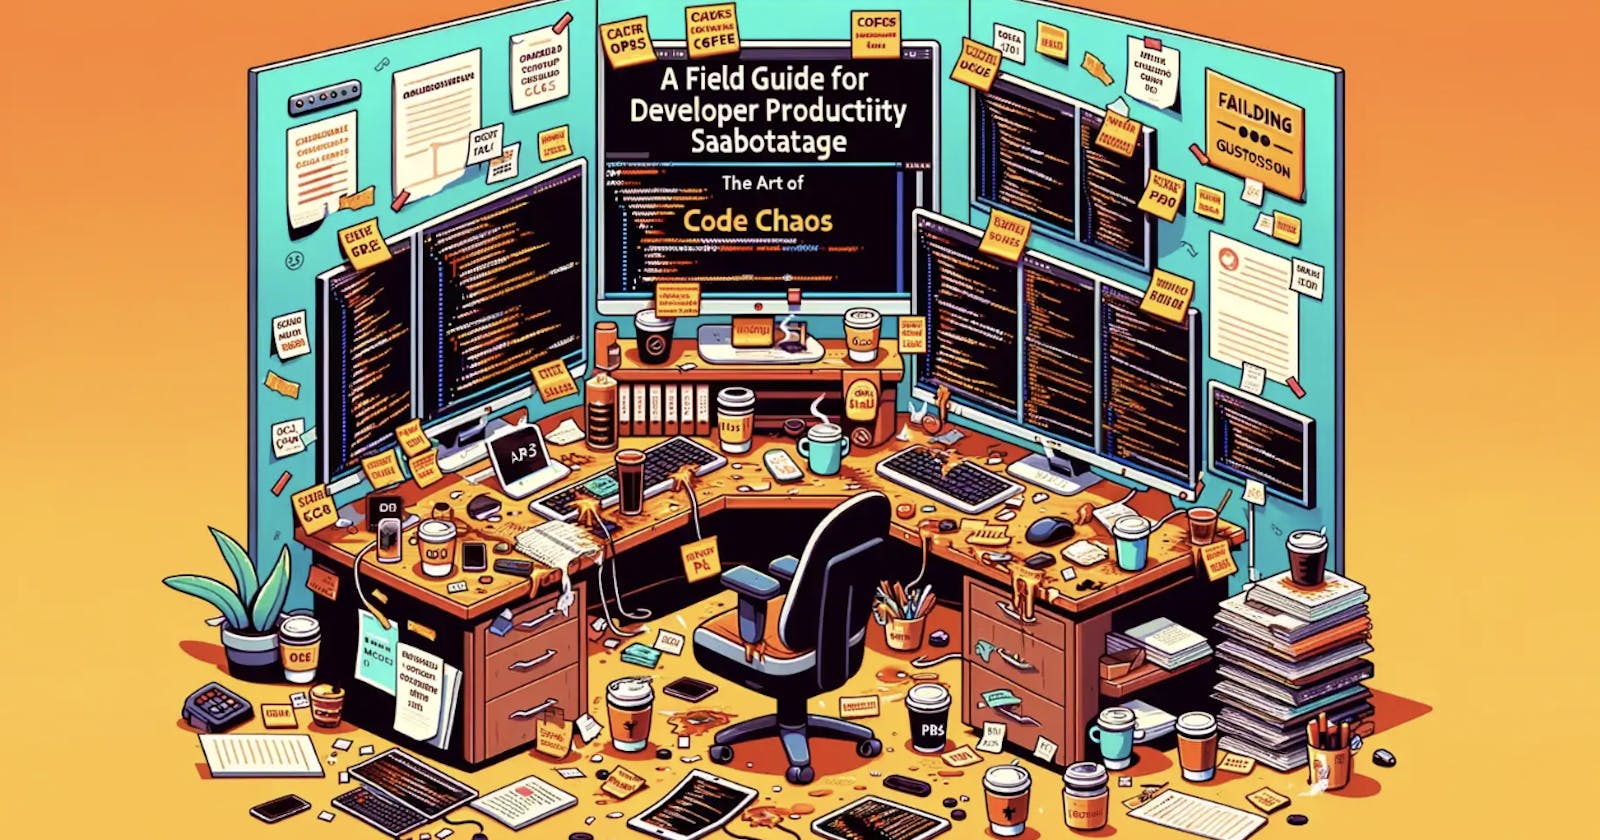 A Field Guide for Sabotaging Developer Productivity: The Art of Code Chaos